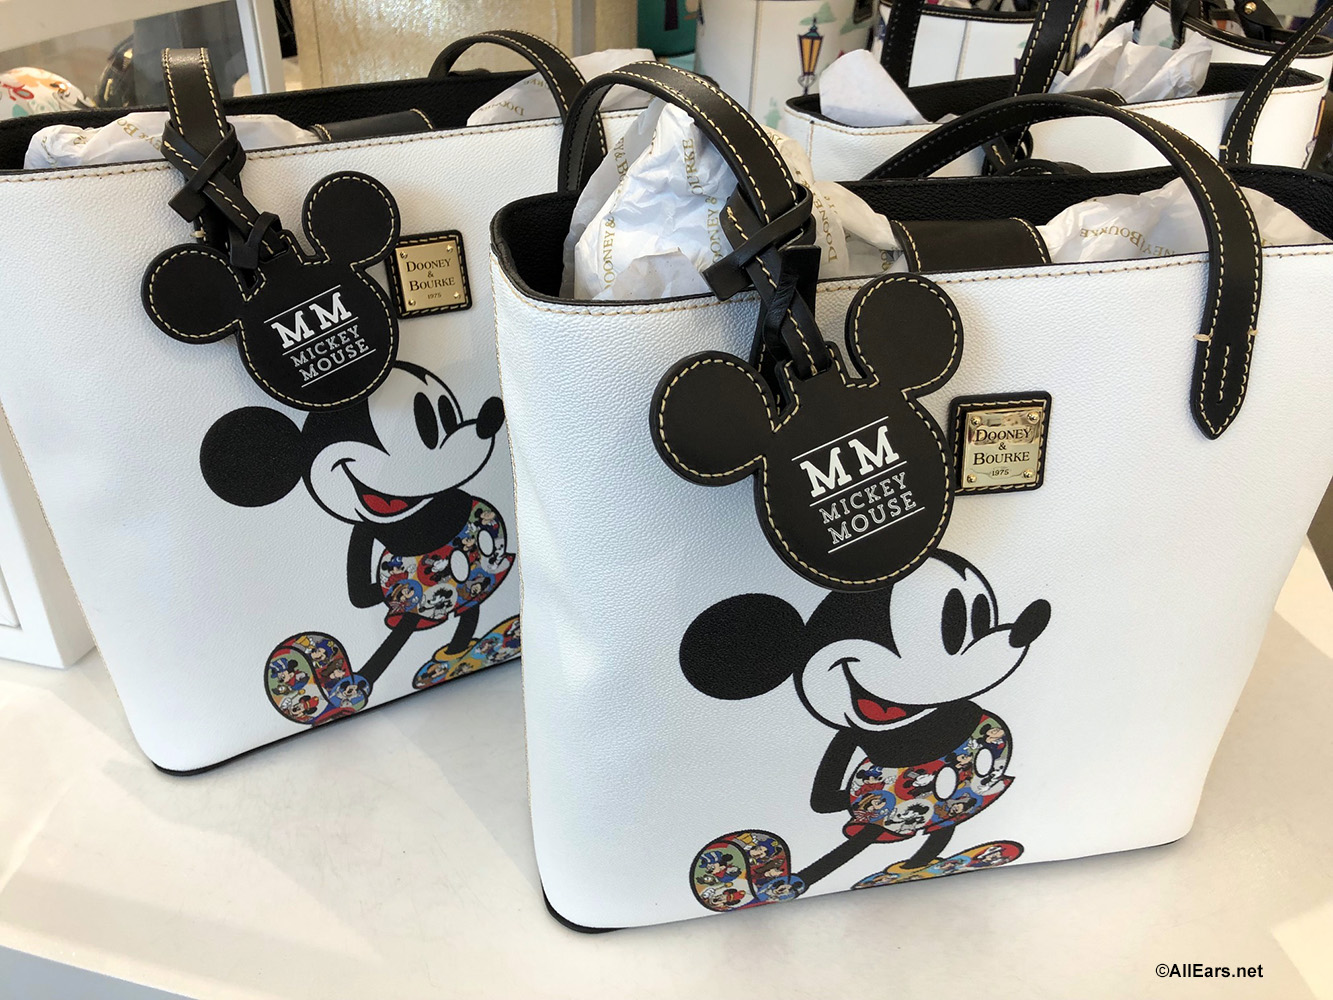 New Mickey Through the Years Dooney and Bourke Totes Available - AllEars.Net